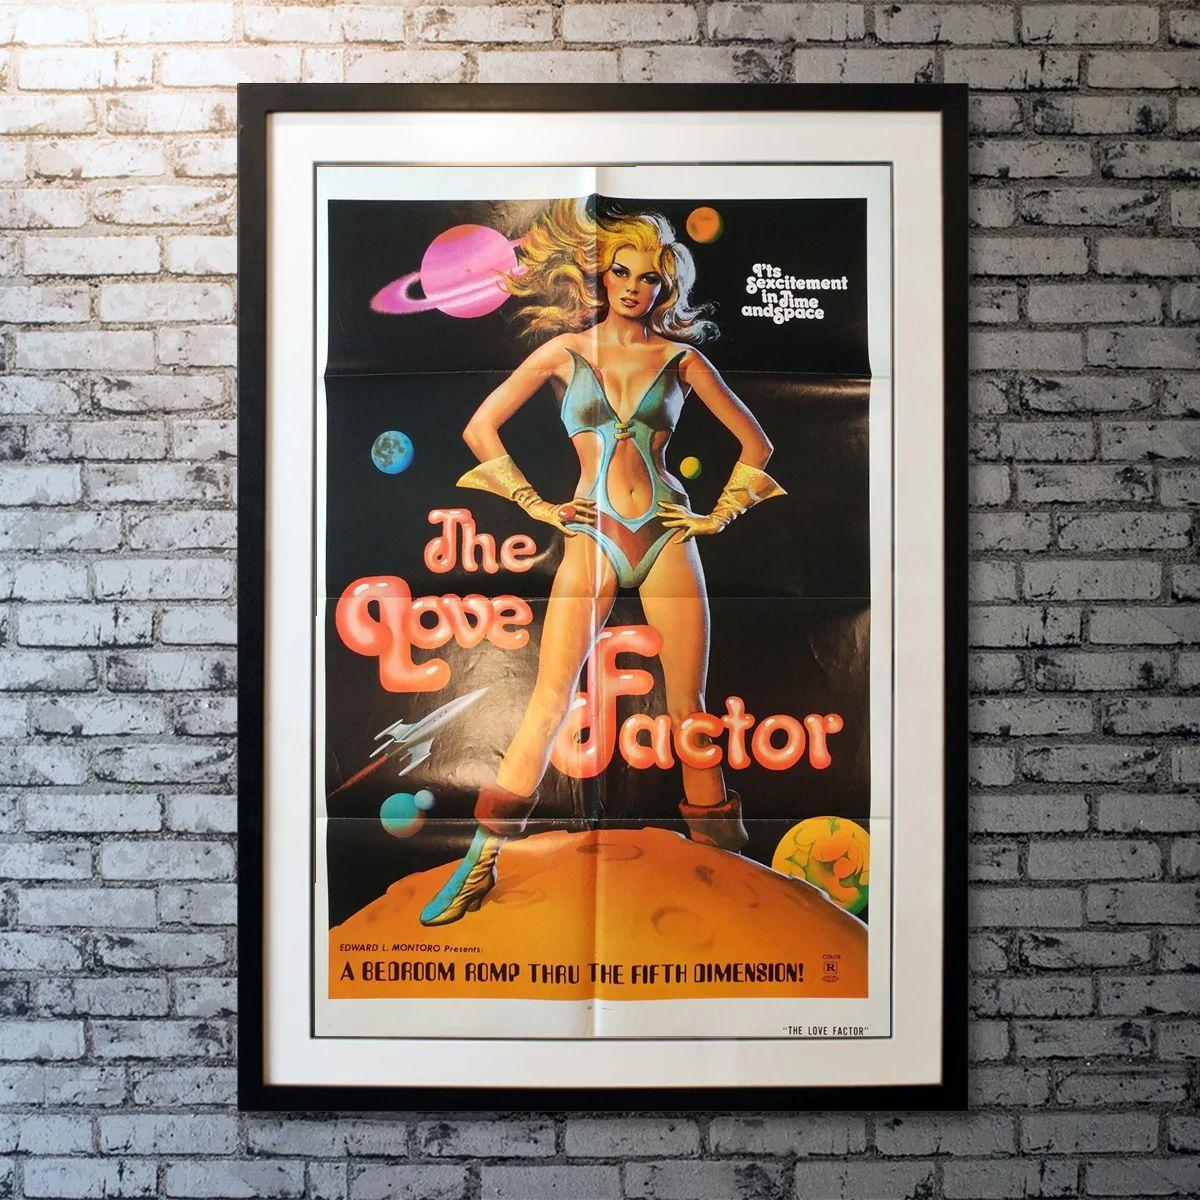 The Love Factor, unframed poster, 1969

Original one sheet (27 X 41 Inches). A race of sexy women from Angvia, a planet in another dimension, comes to Earth to kidnap women to repopulate their planet.

Year: 1969
Nationality: United